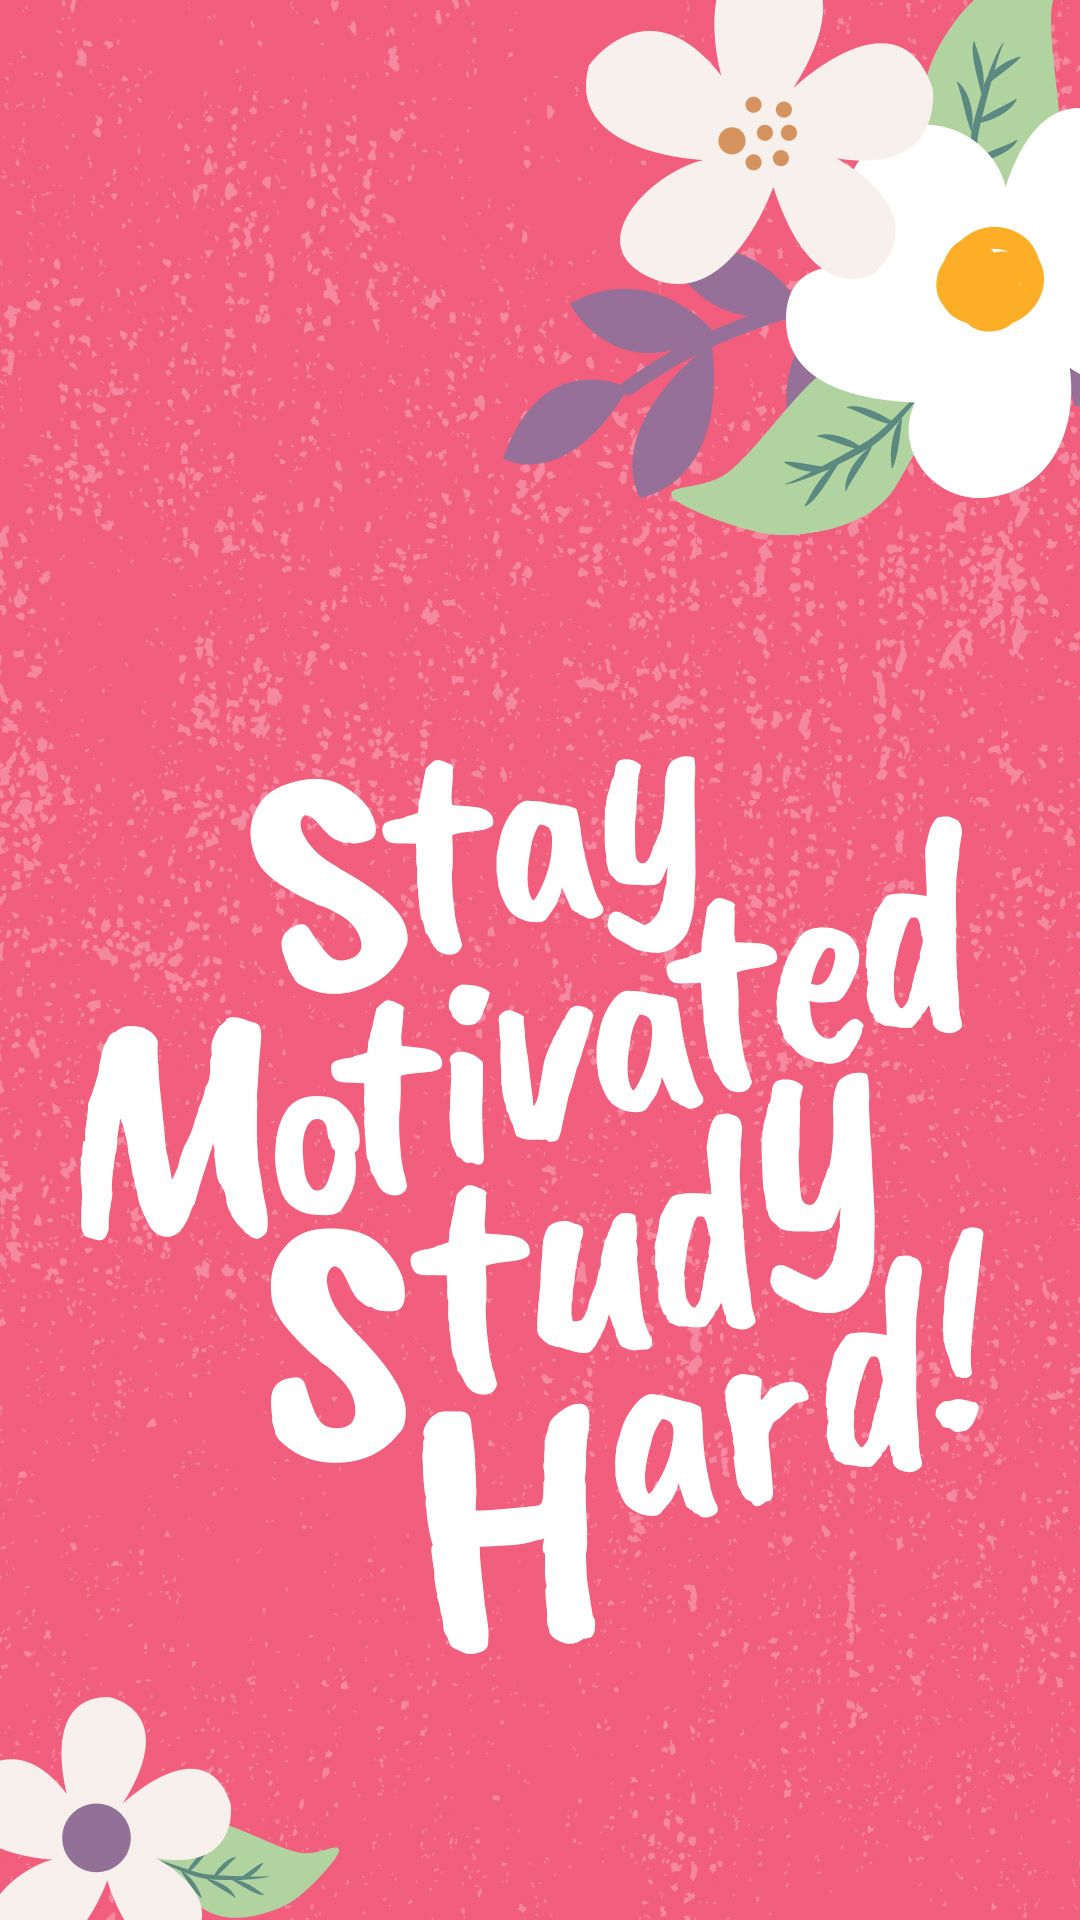 Free Colorful Smartphone Wallpaper motivated, Study hard